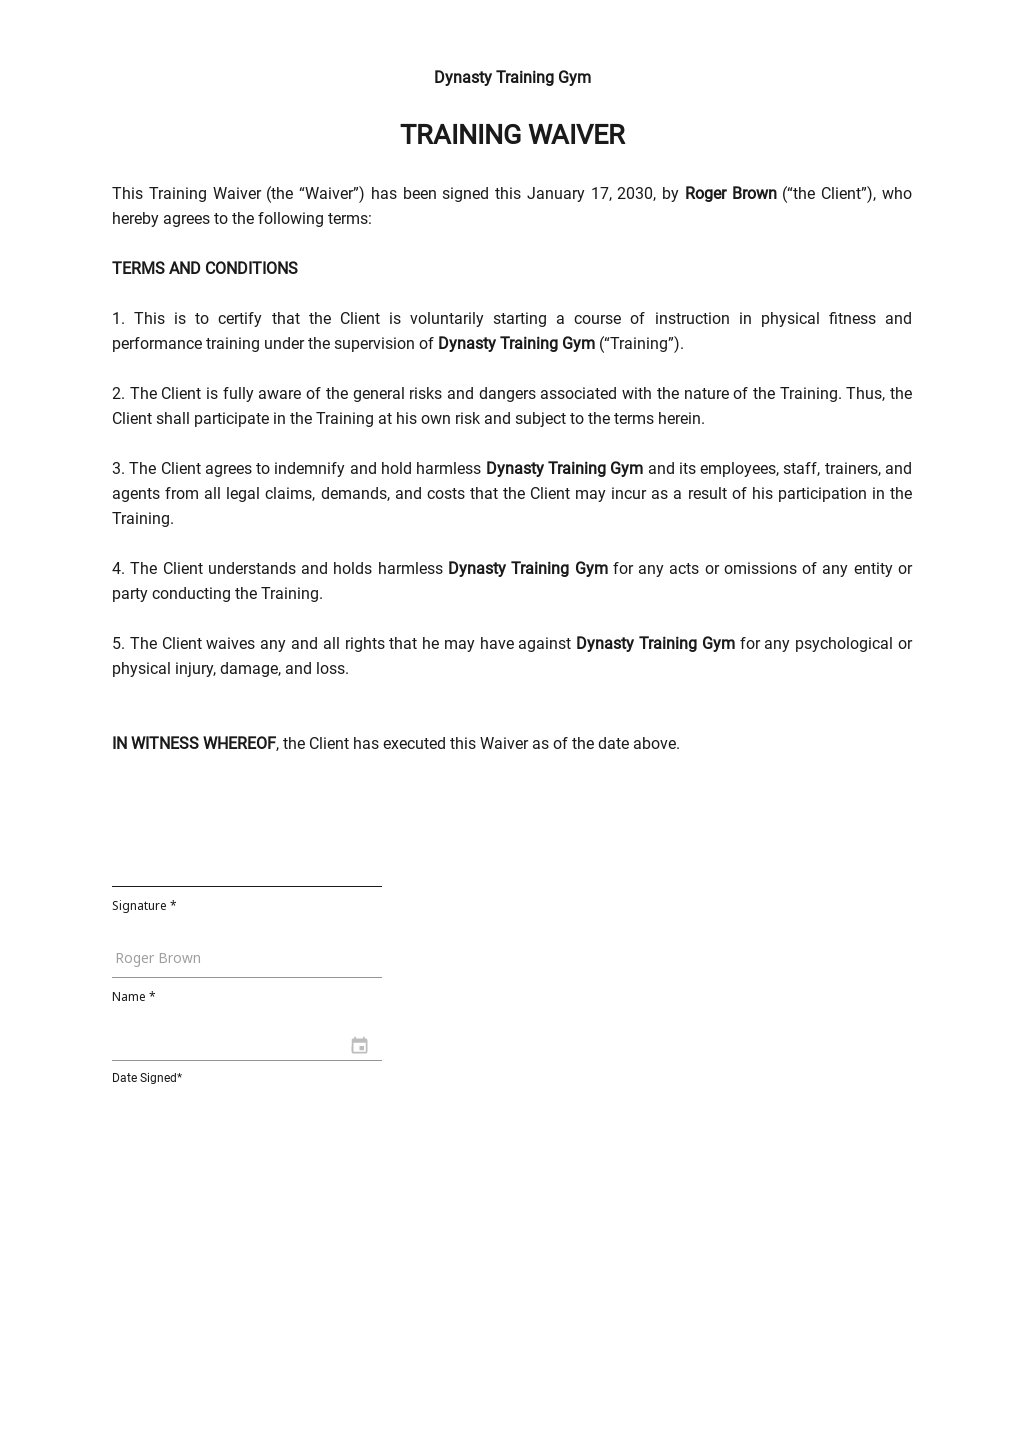 Training Waiver Template in Word, Google Docs